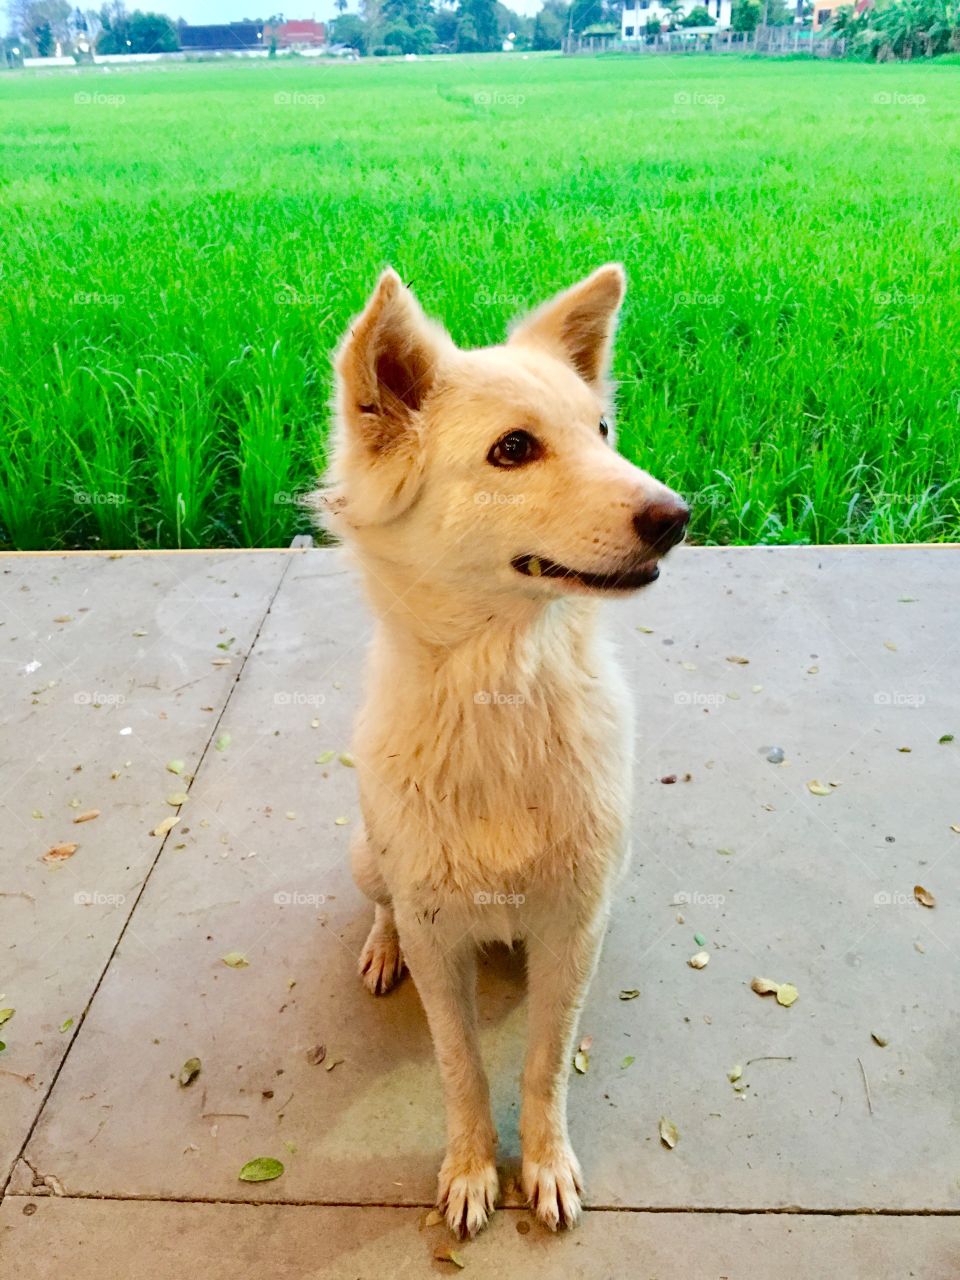 Handsome dog at the rice field 